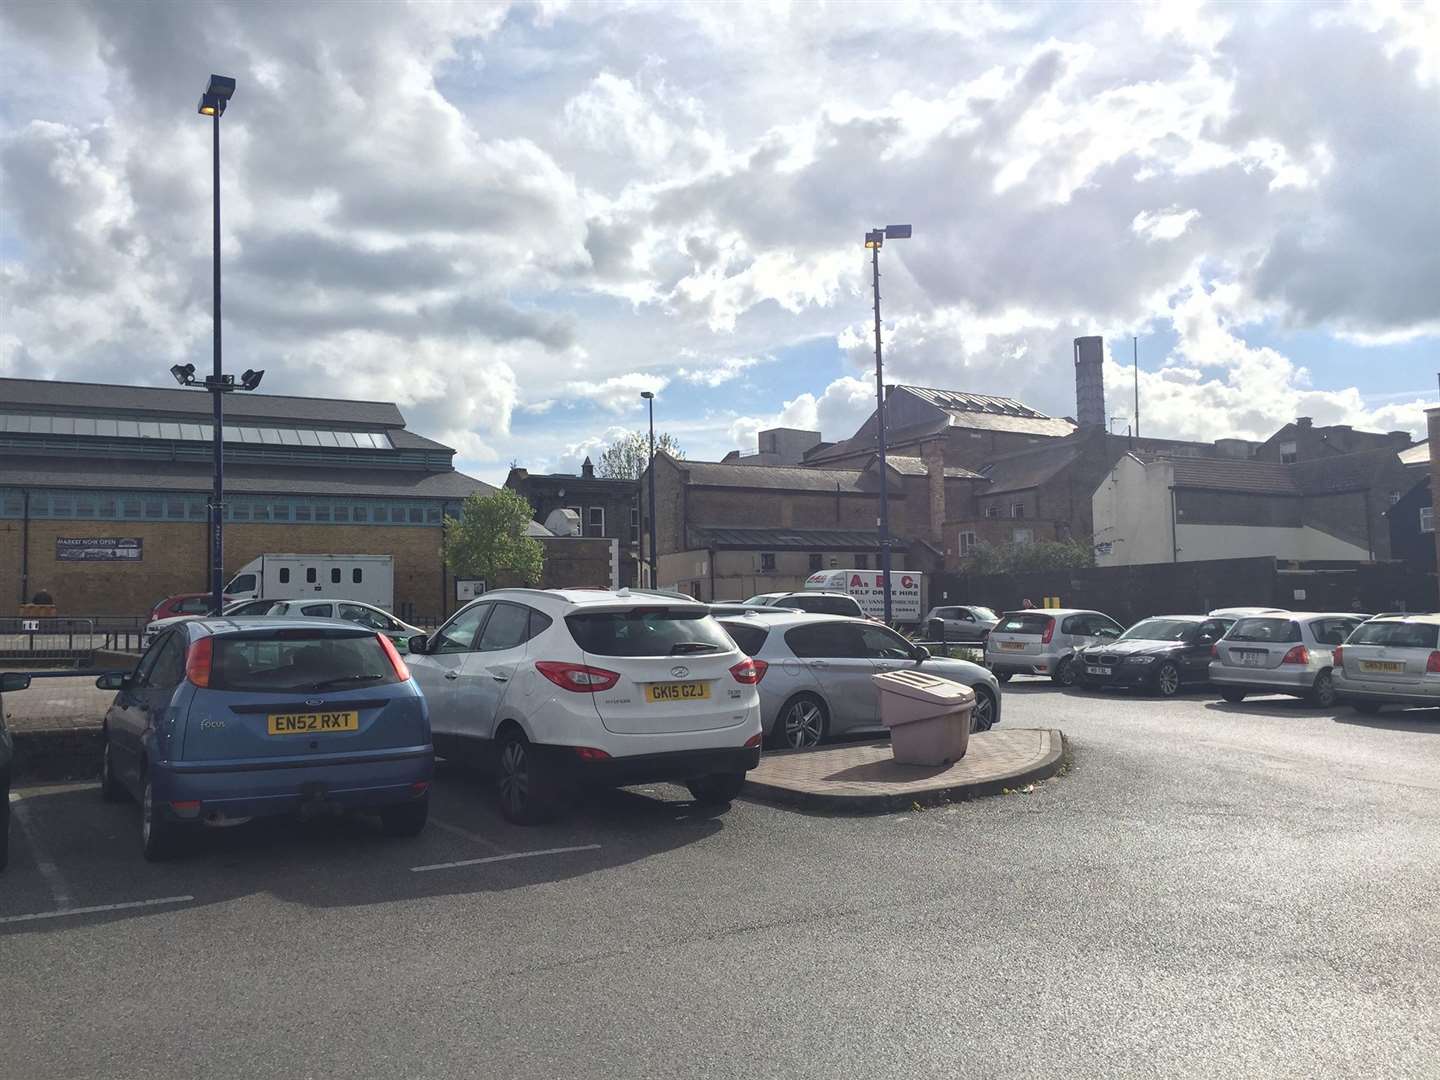 Market Square car park will be shut for a few weeks